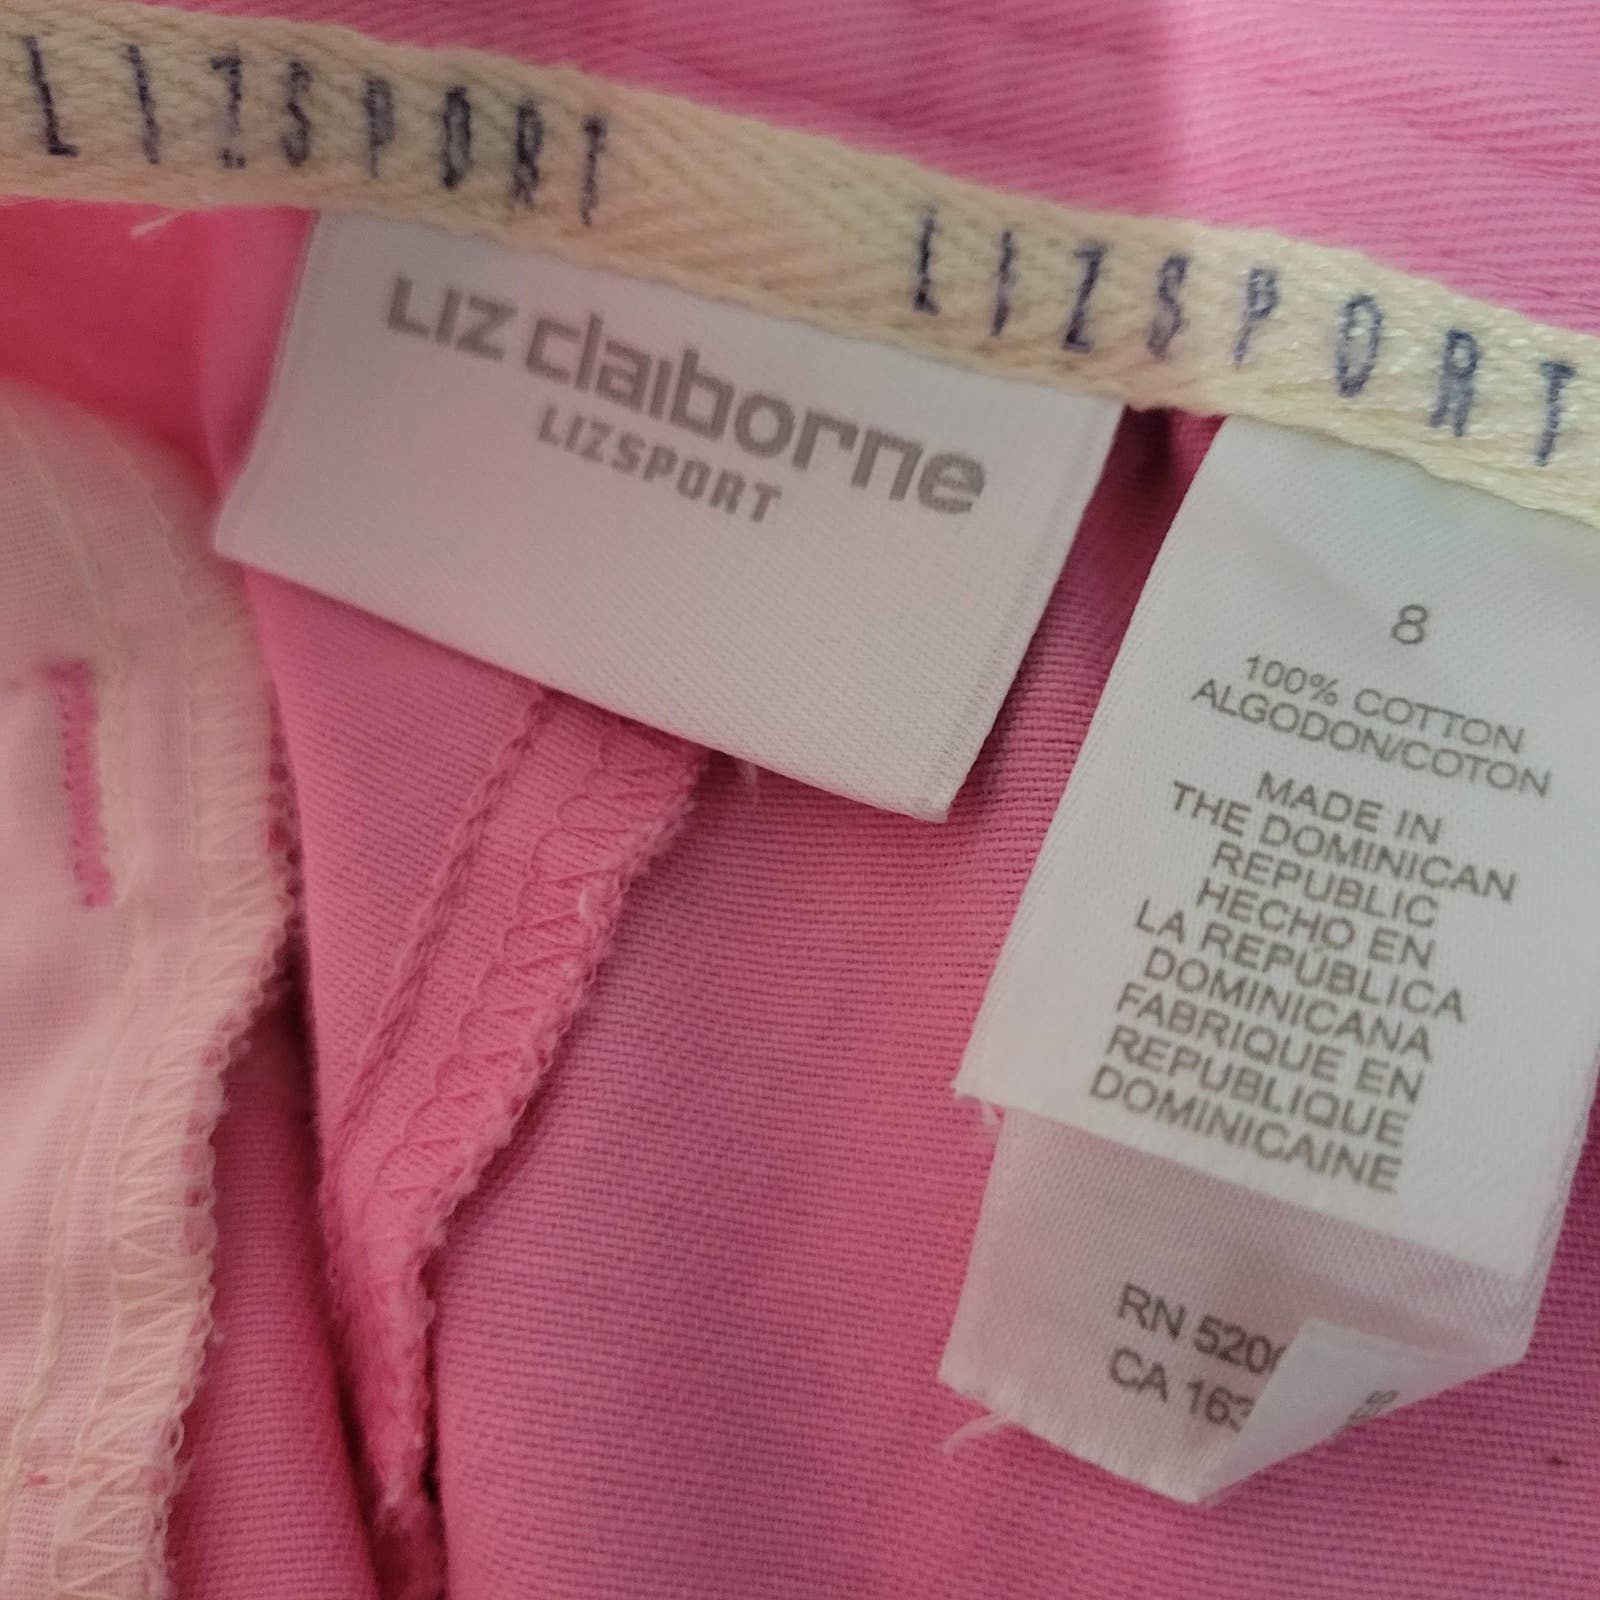 Vintage Liz Claiborne High Waisted Shorts Pink Pleated Mom Wide Leg Size 4 6